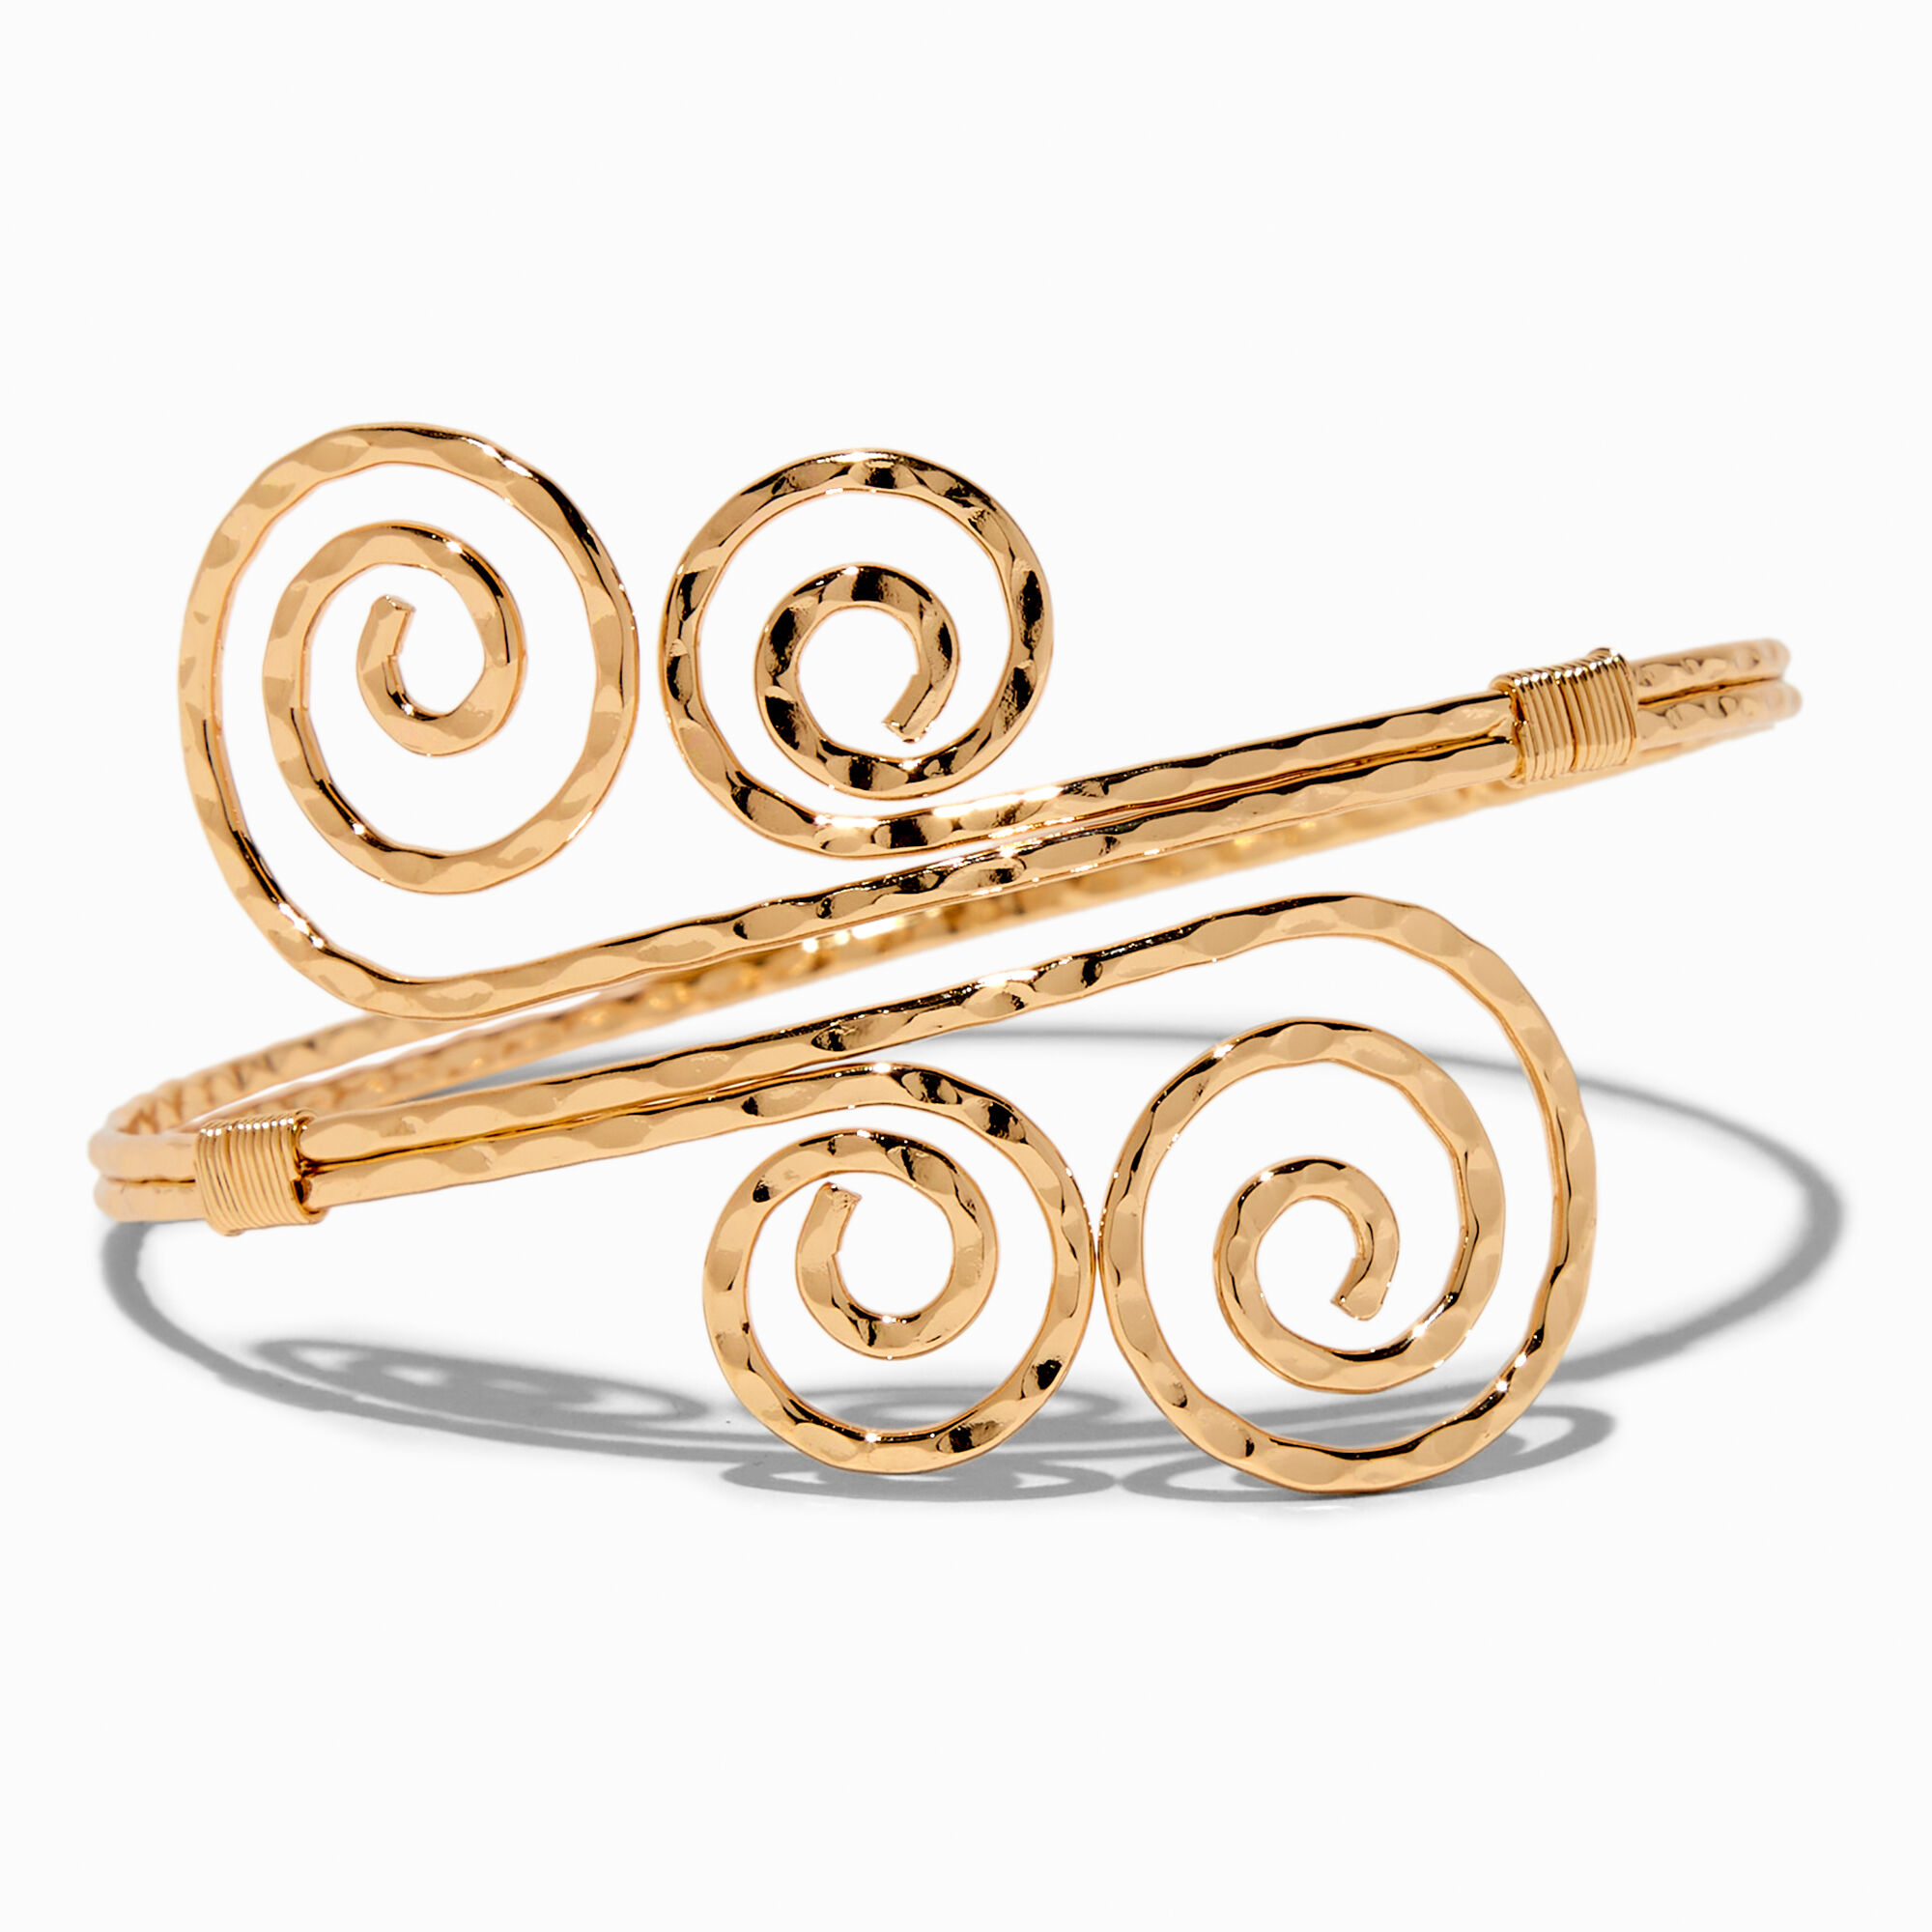 View Claires Tone Swirl Arm Band Gold information